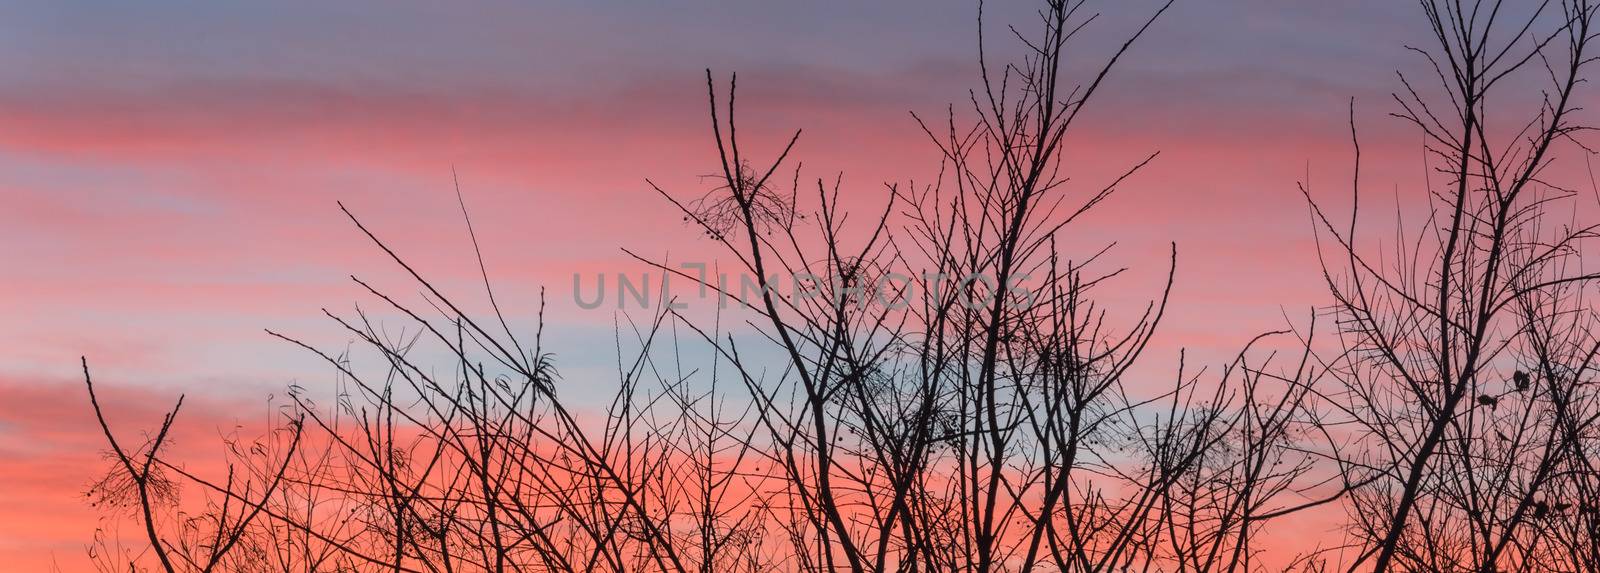 Panoramic view silhouette of bare tree branches in winter time with beautiful sunrise clouds by trongnguyen